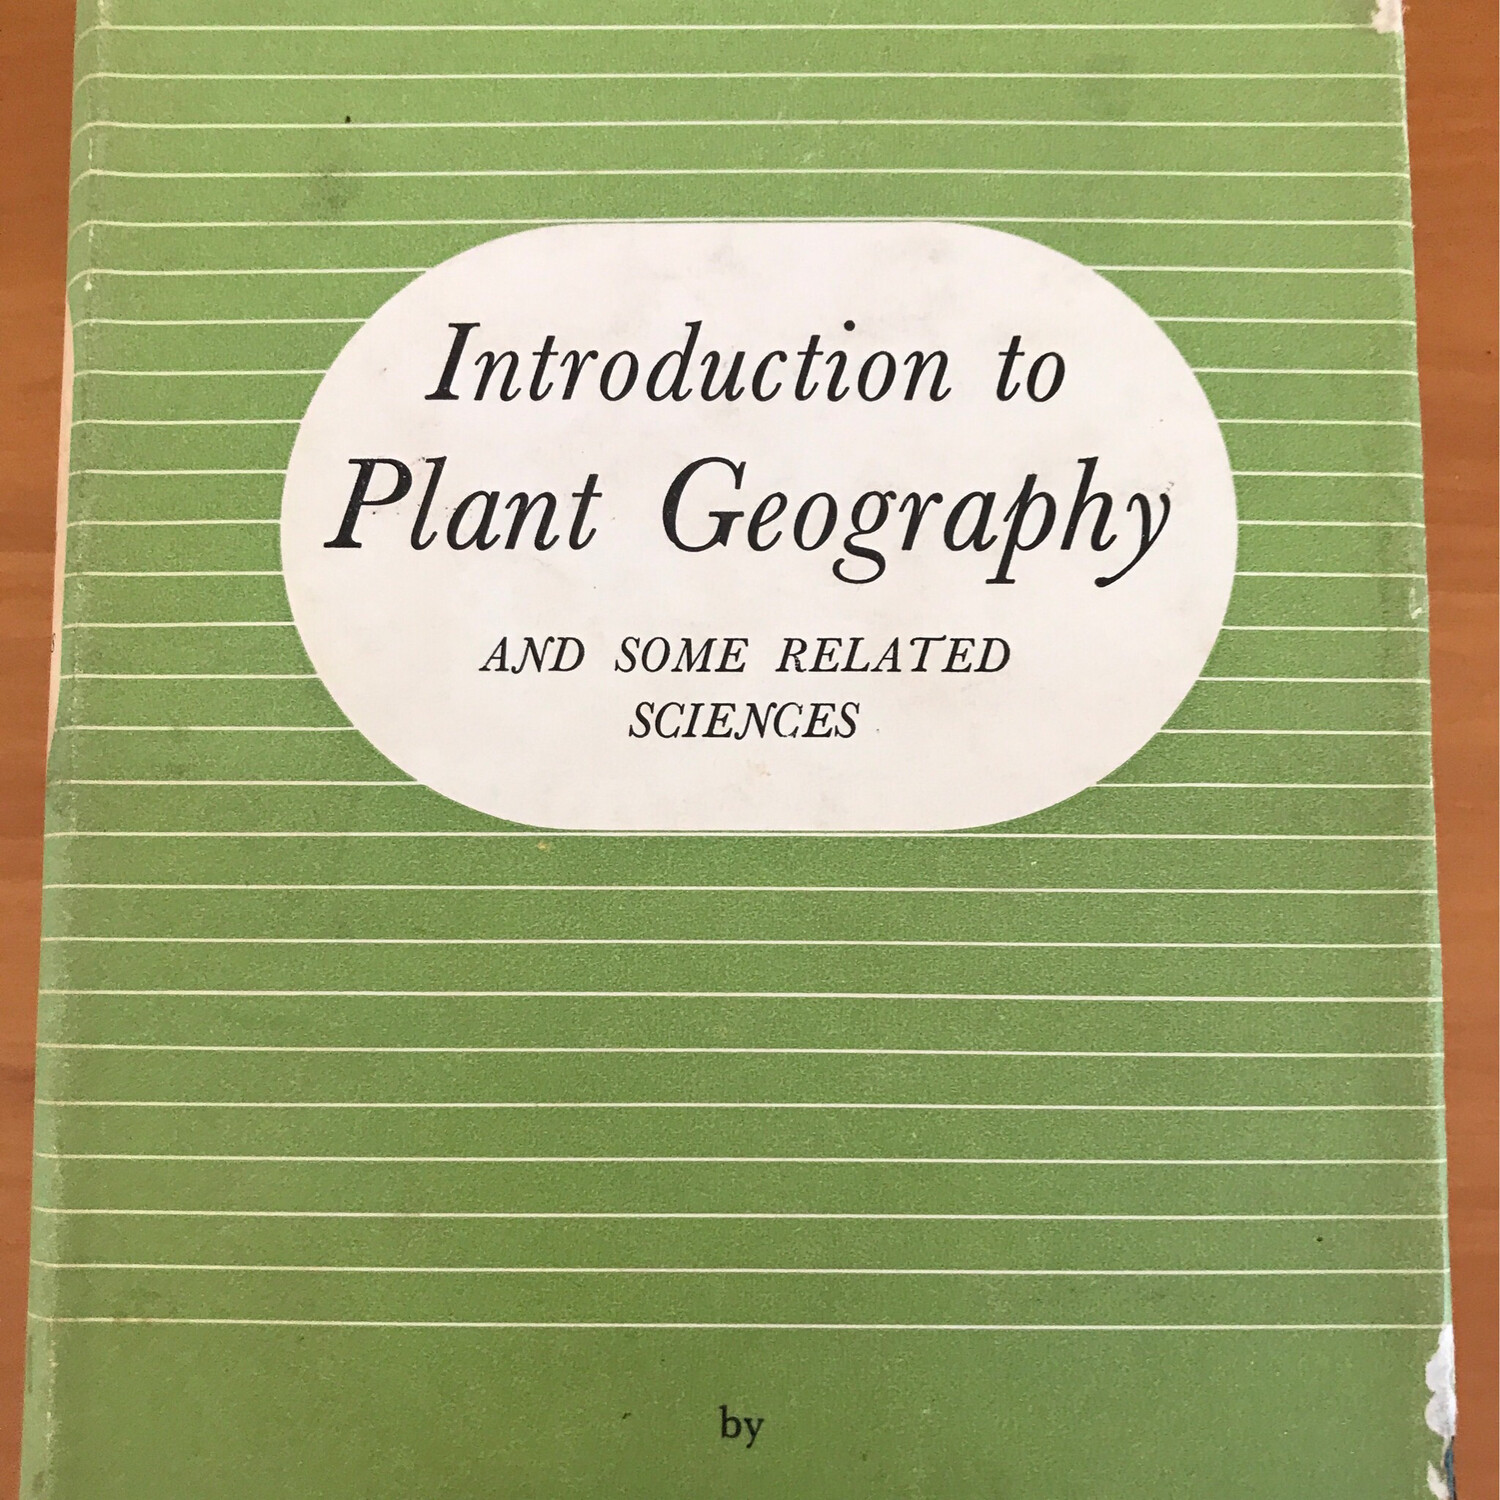 Introduction To Plant Geography And Some Related Sciences, Nicholas Polunin